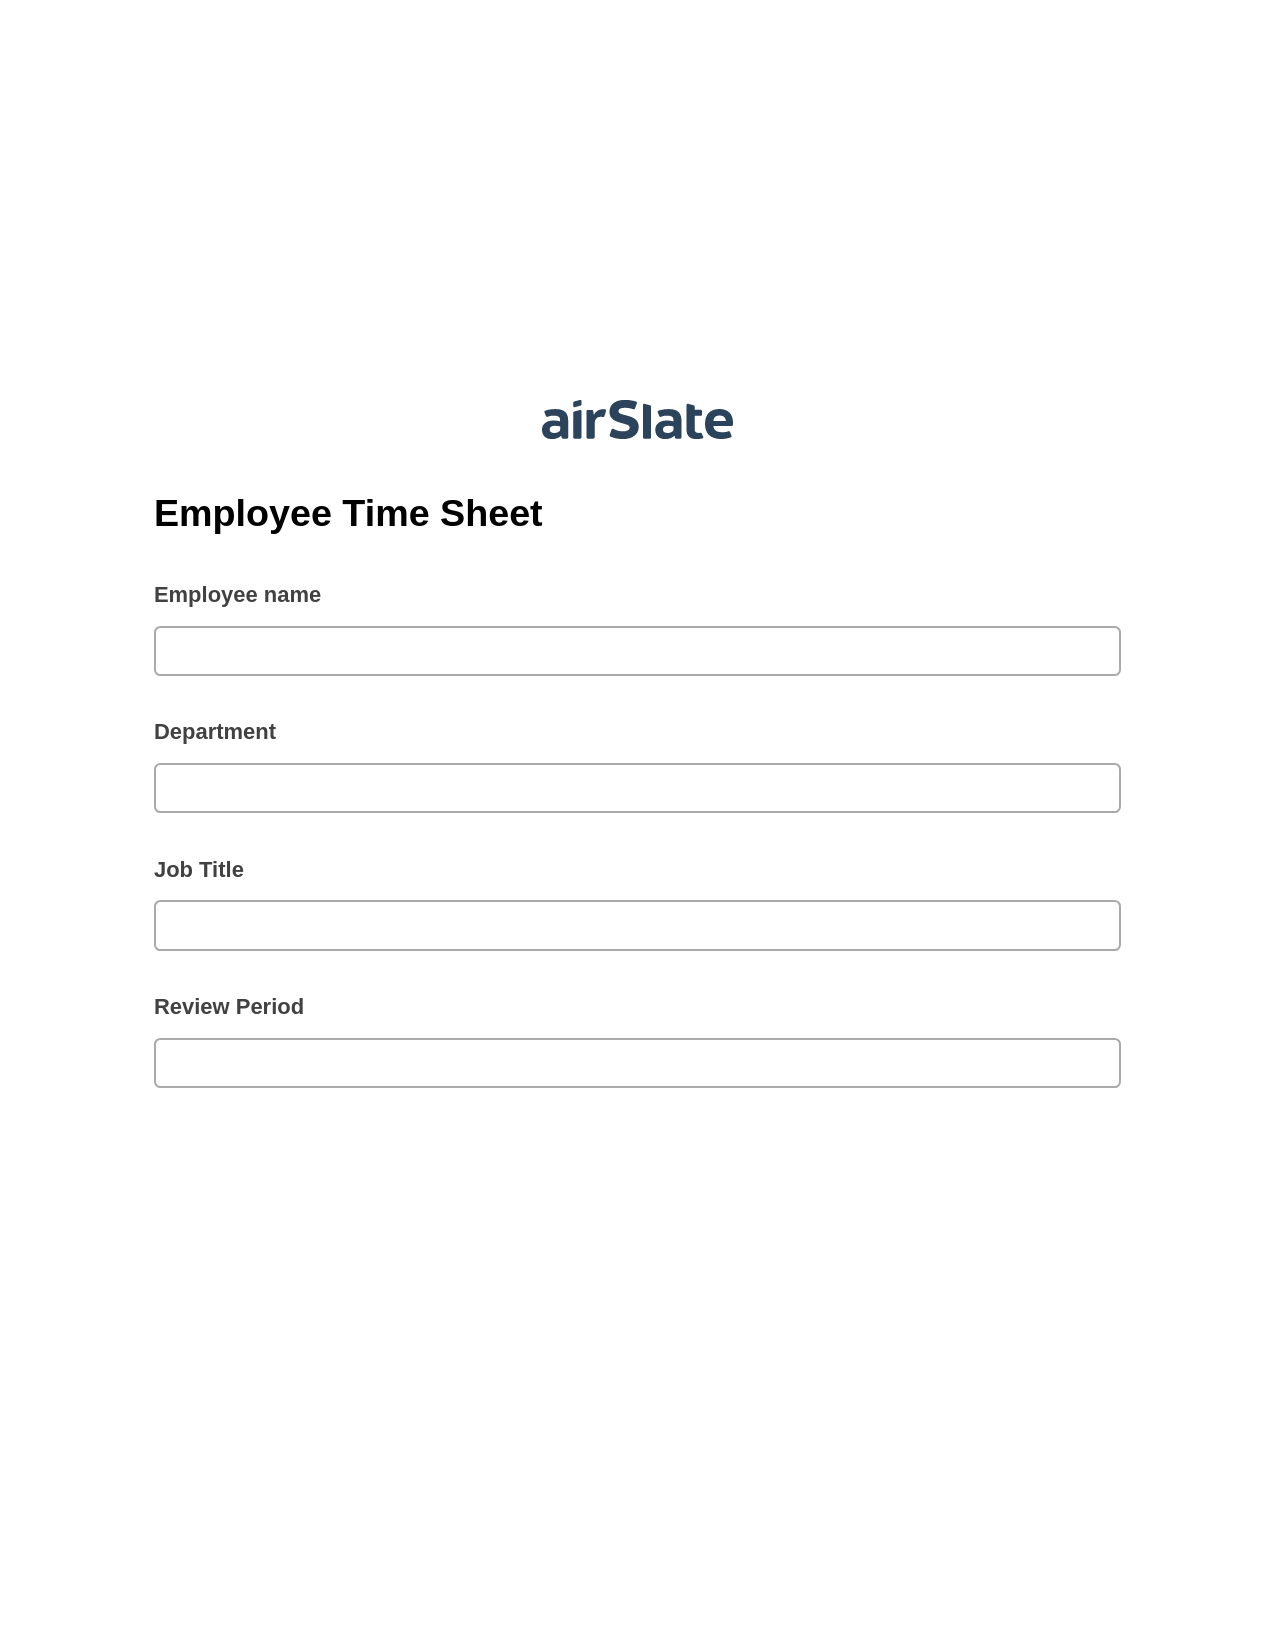 Multirole Employee Time Sheet Prefill from NetSuite records, Update Audit Trail Bot, Export to NetSuite Bot